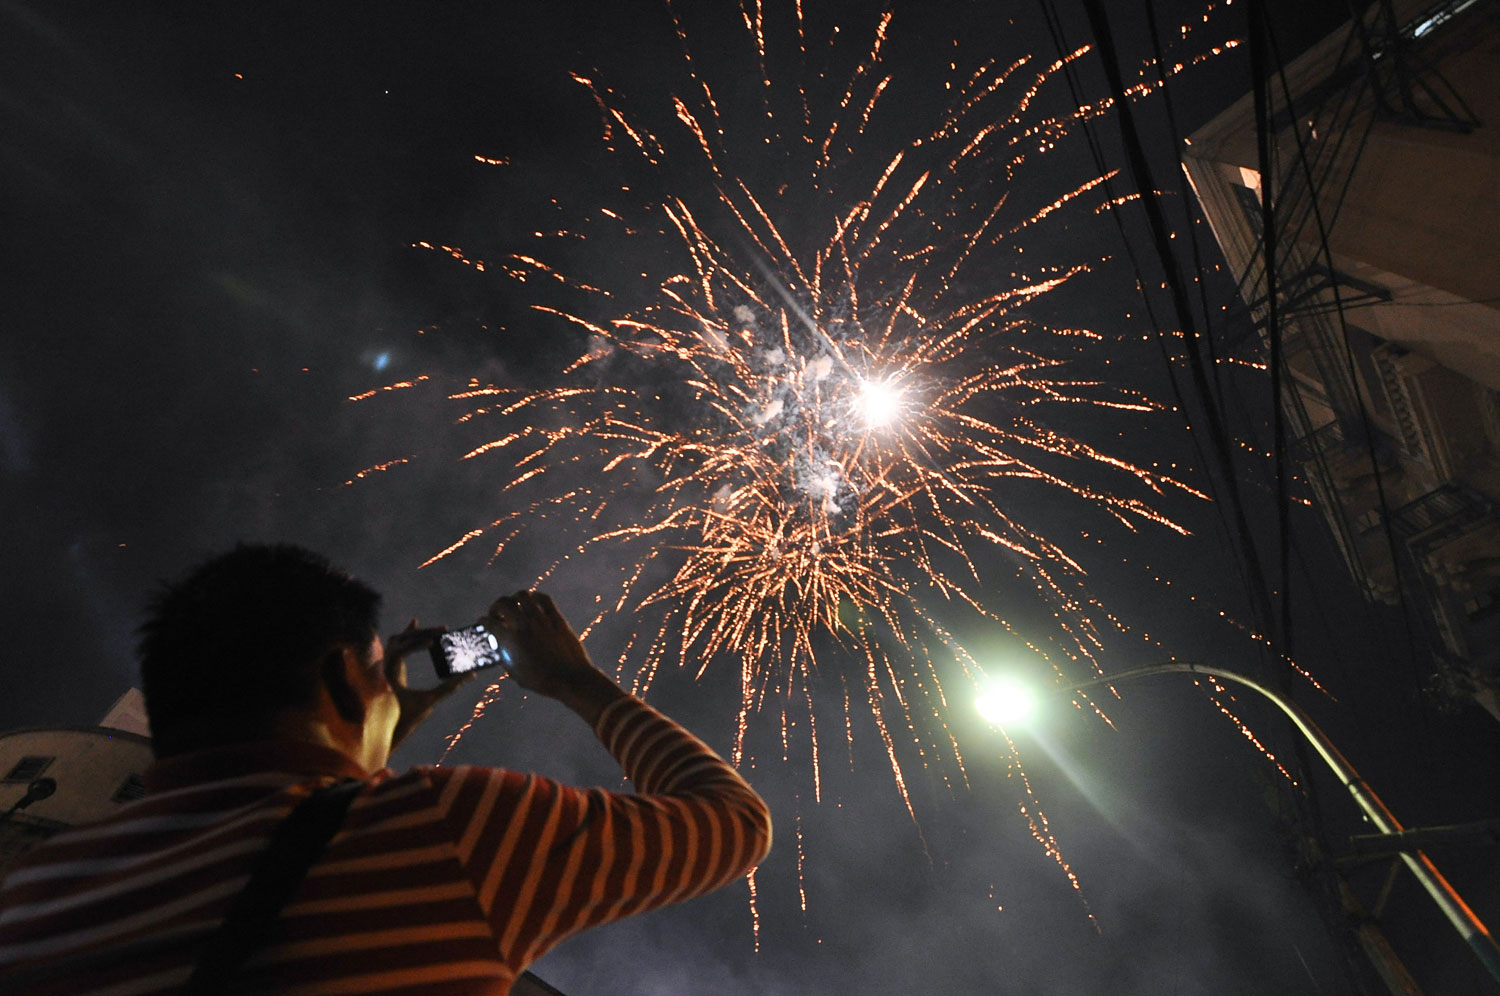 A man films the fireworks display using his phone in Chinatown, on the eve of Chinese New Year in Manila, Philippines, Jan. 30, 2014.